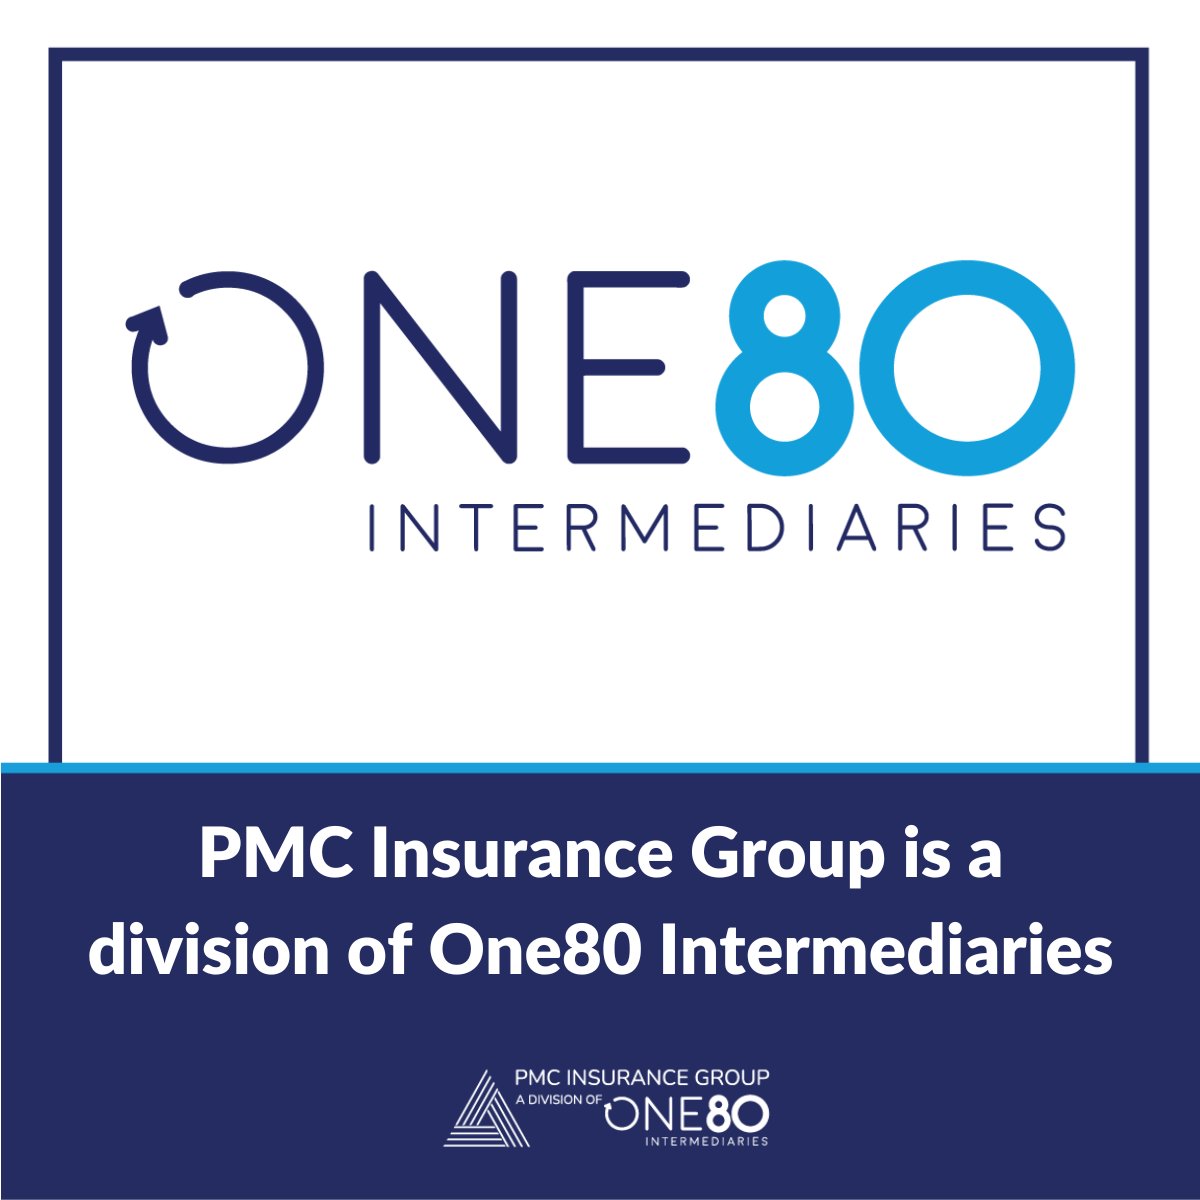 PMC Insurance Group is a division of One80 Intermediaries. Through One80 you gain access to coverage solutions for a wide range of insurance needs. Learn more at one80.com

#insuranceindustry #insurancebrokers #insurancenews #propertyandcasualty